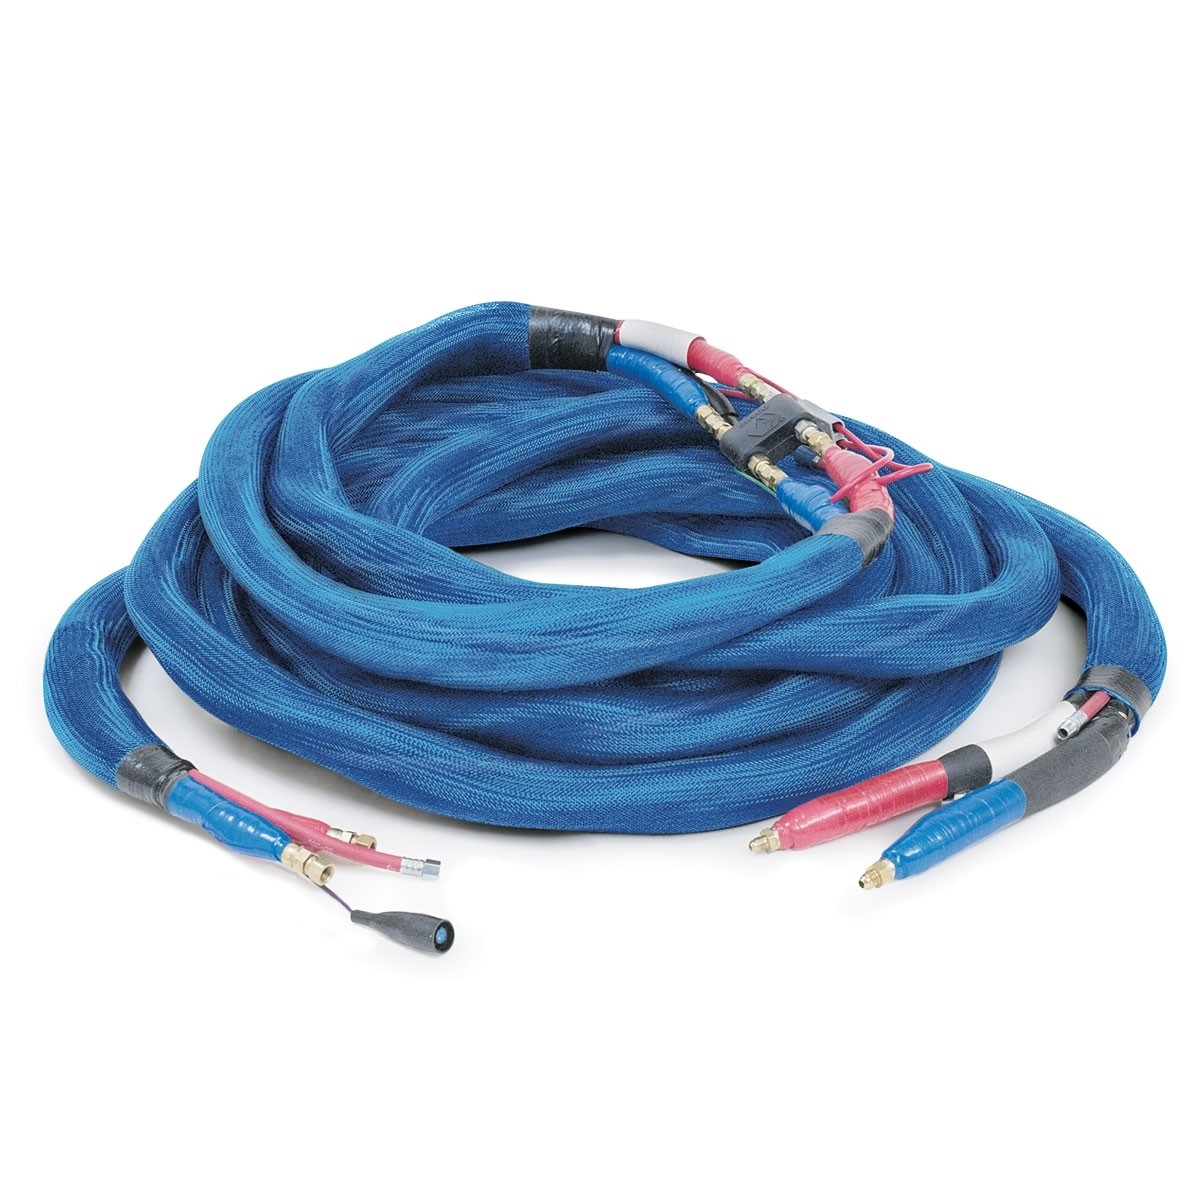 Read more about the article Why Graco heated hoses